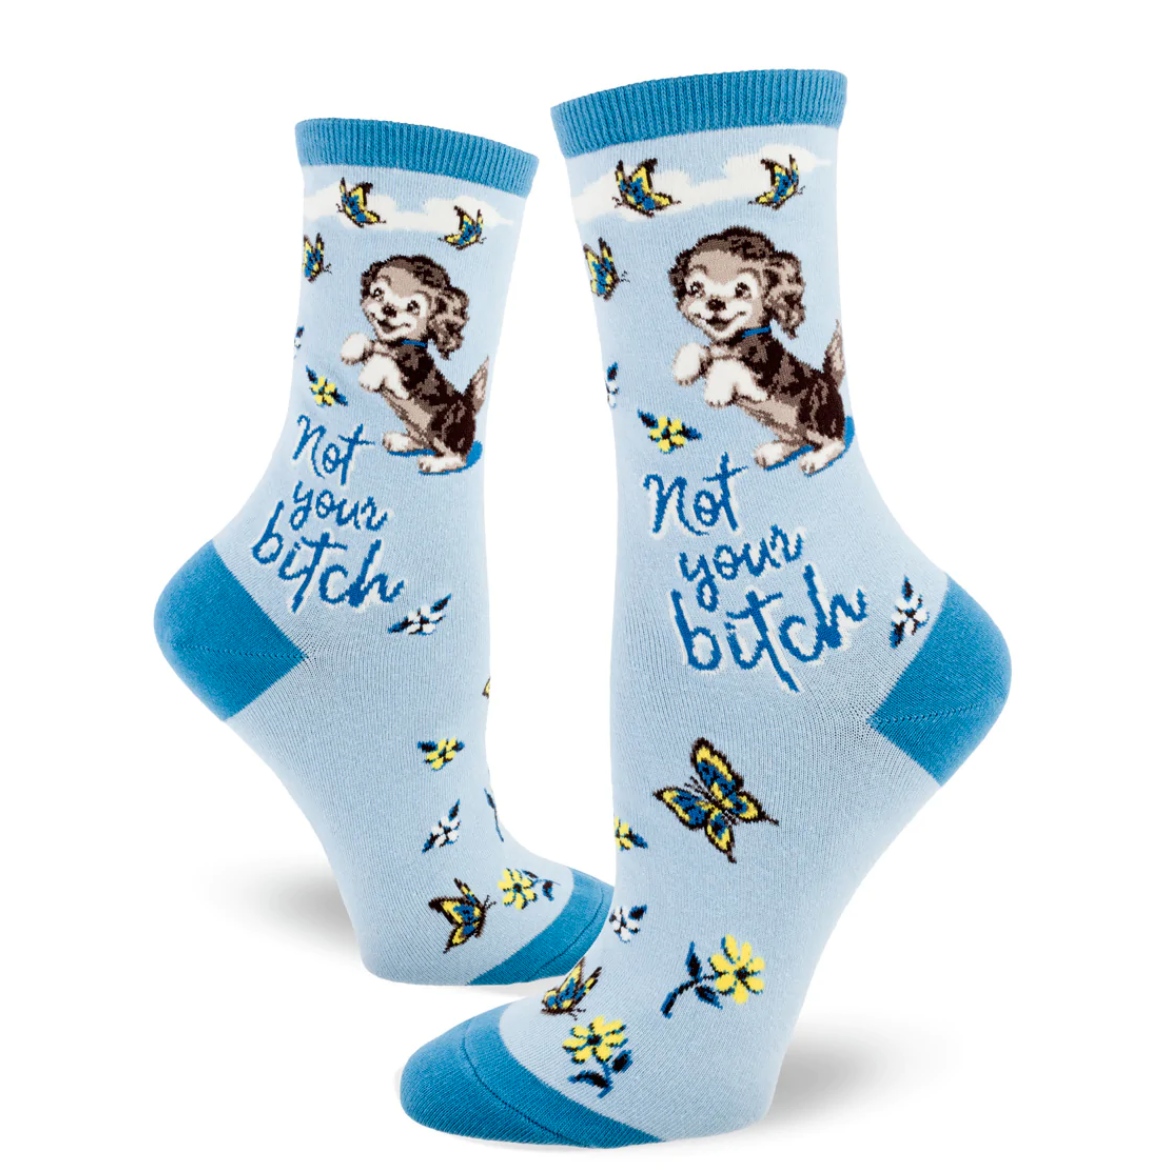 Not Your Bitch Dog Socks